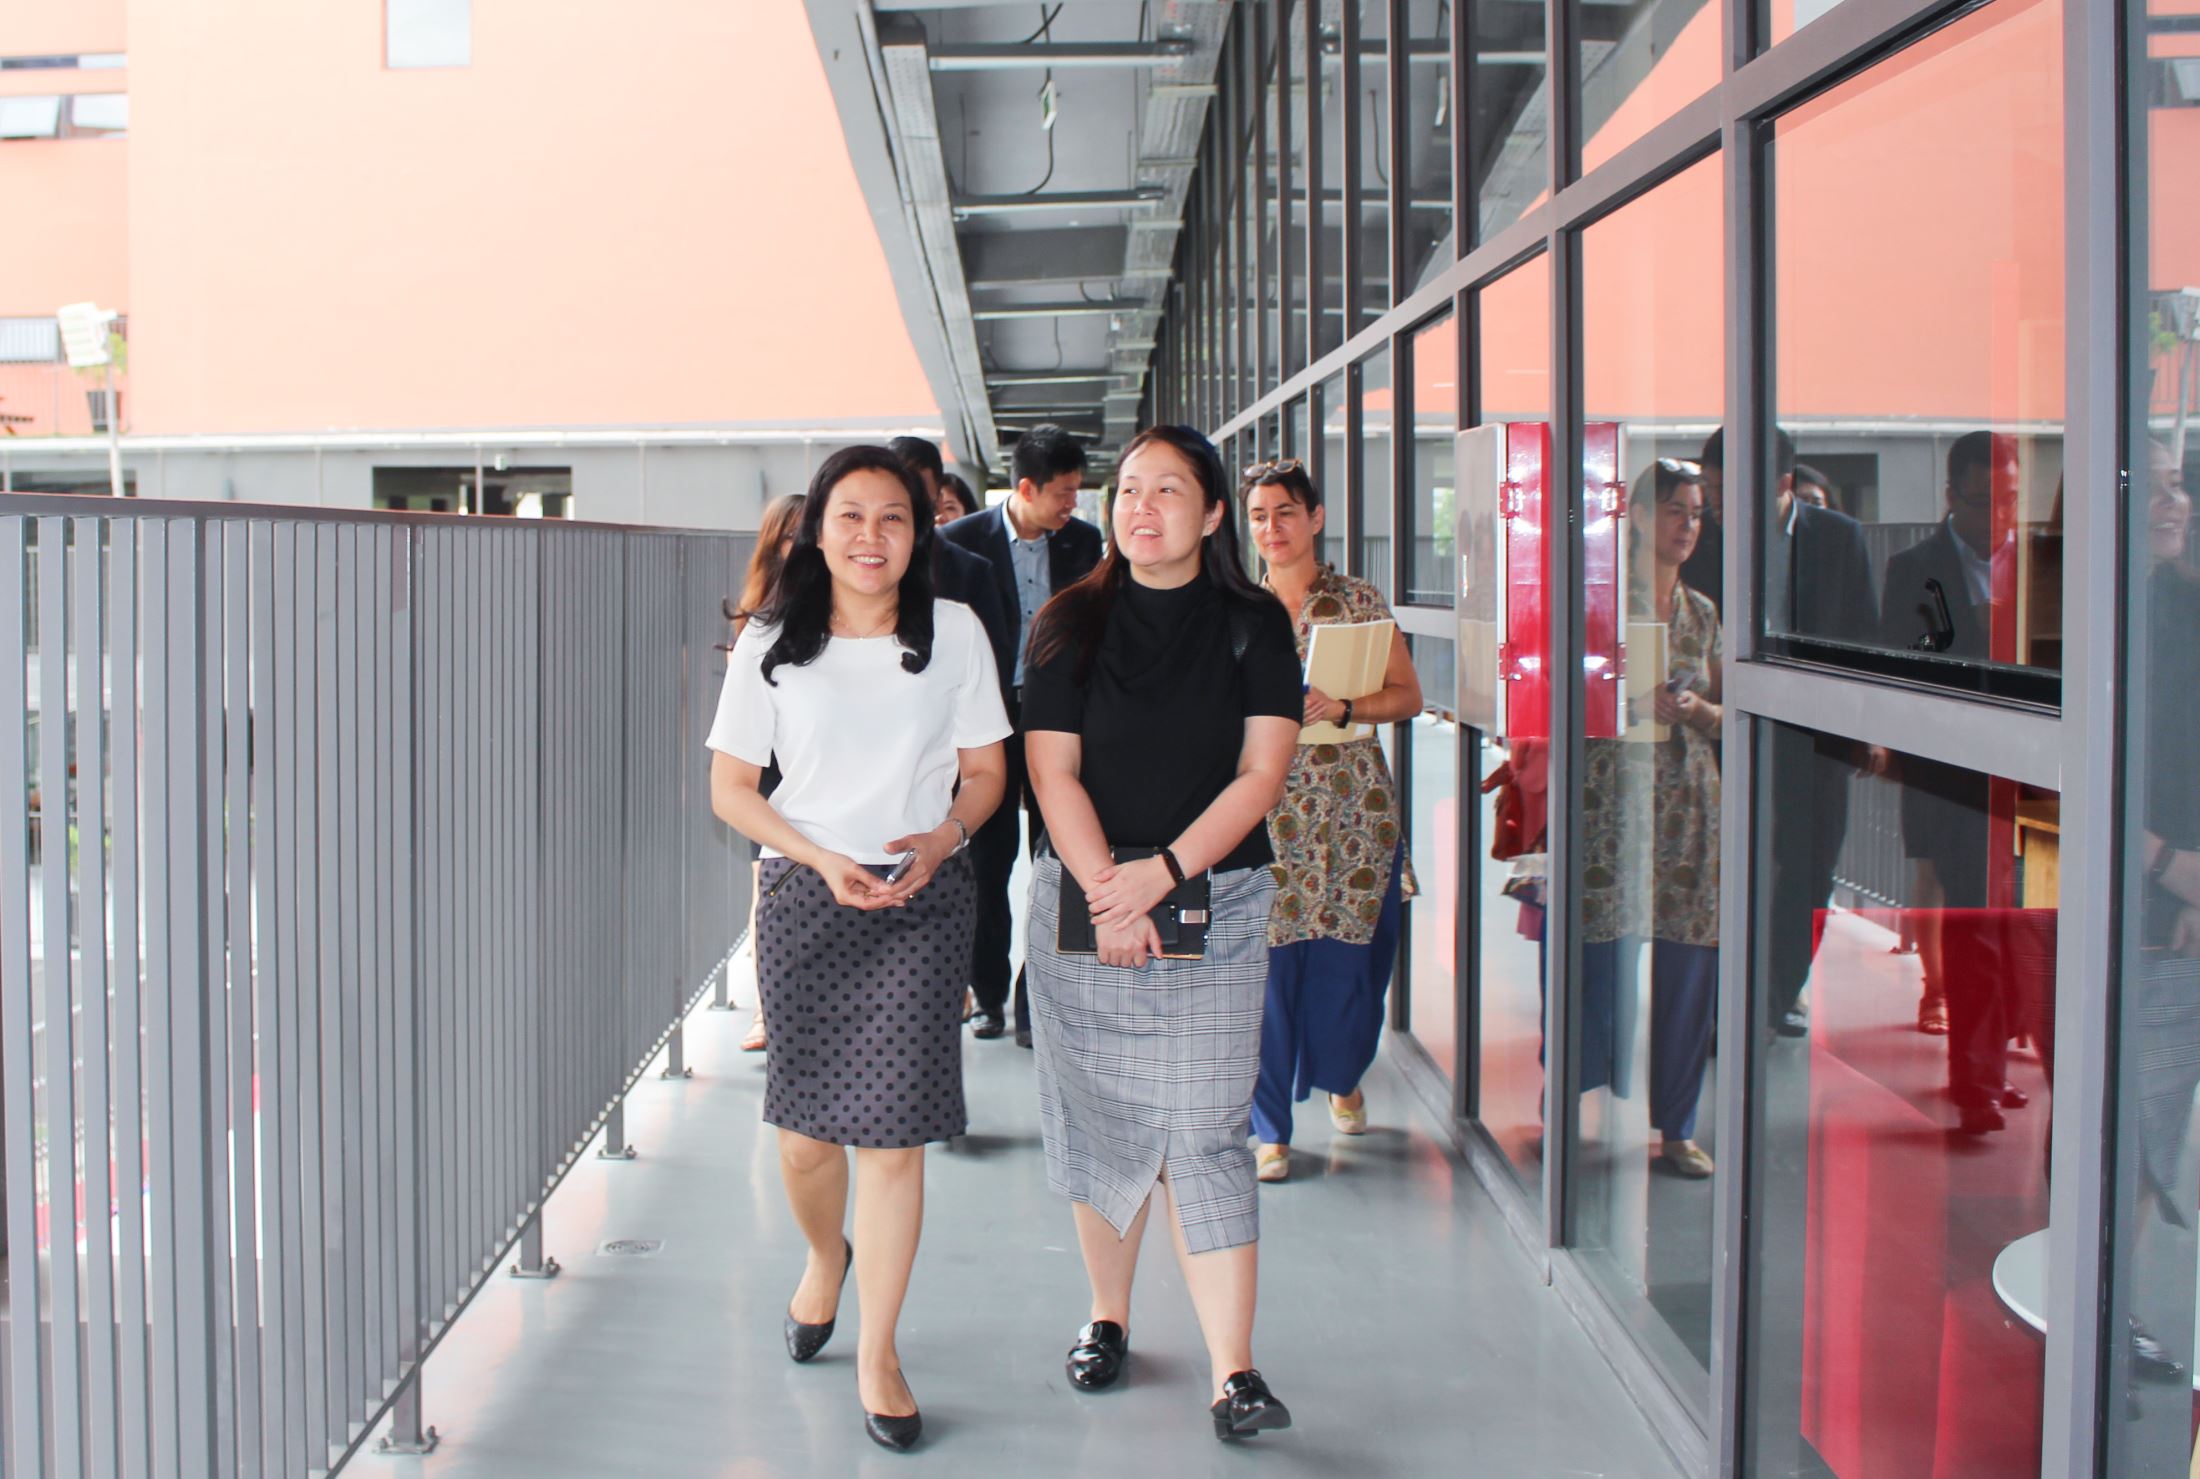 Dr. Doan Hue Dung – Management Director of SNA invited guests to visit school facilities.